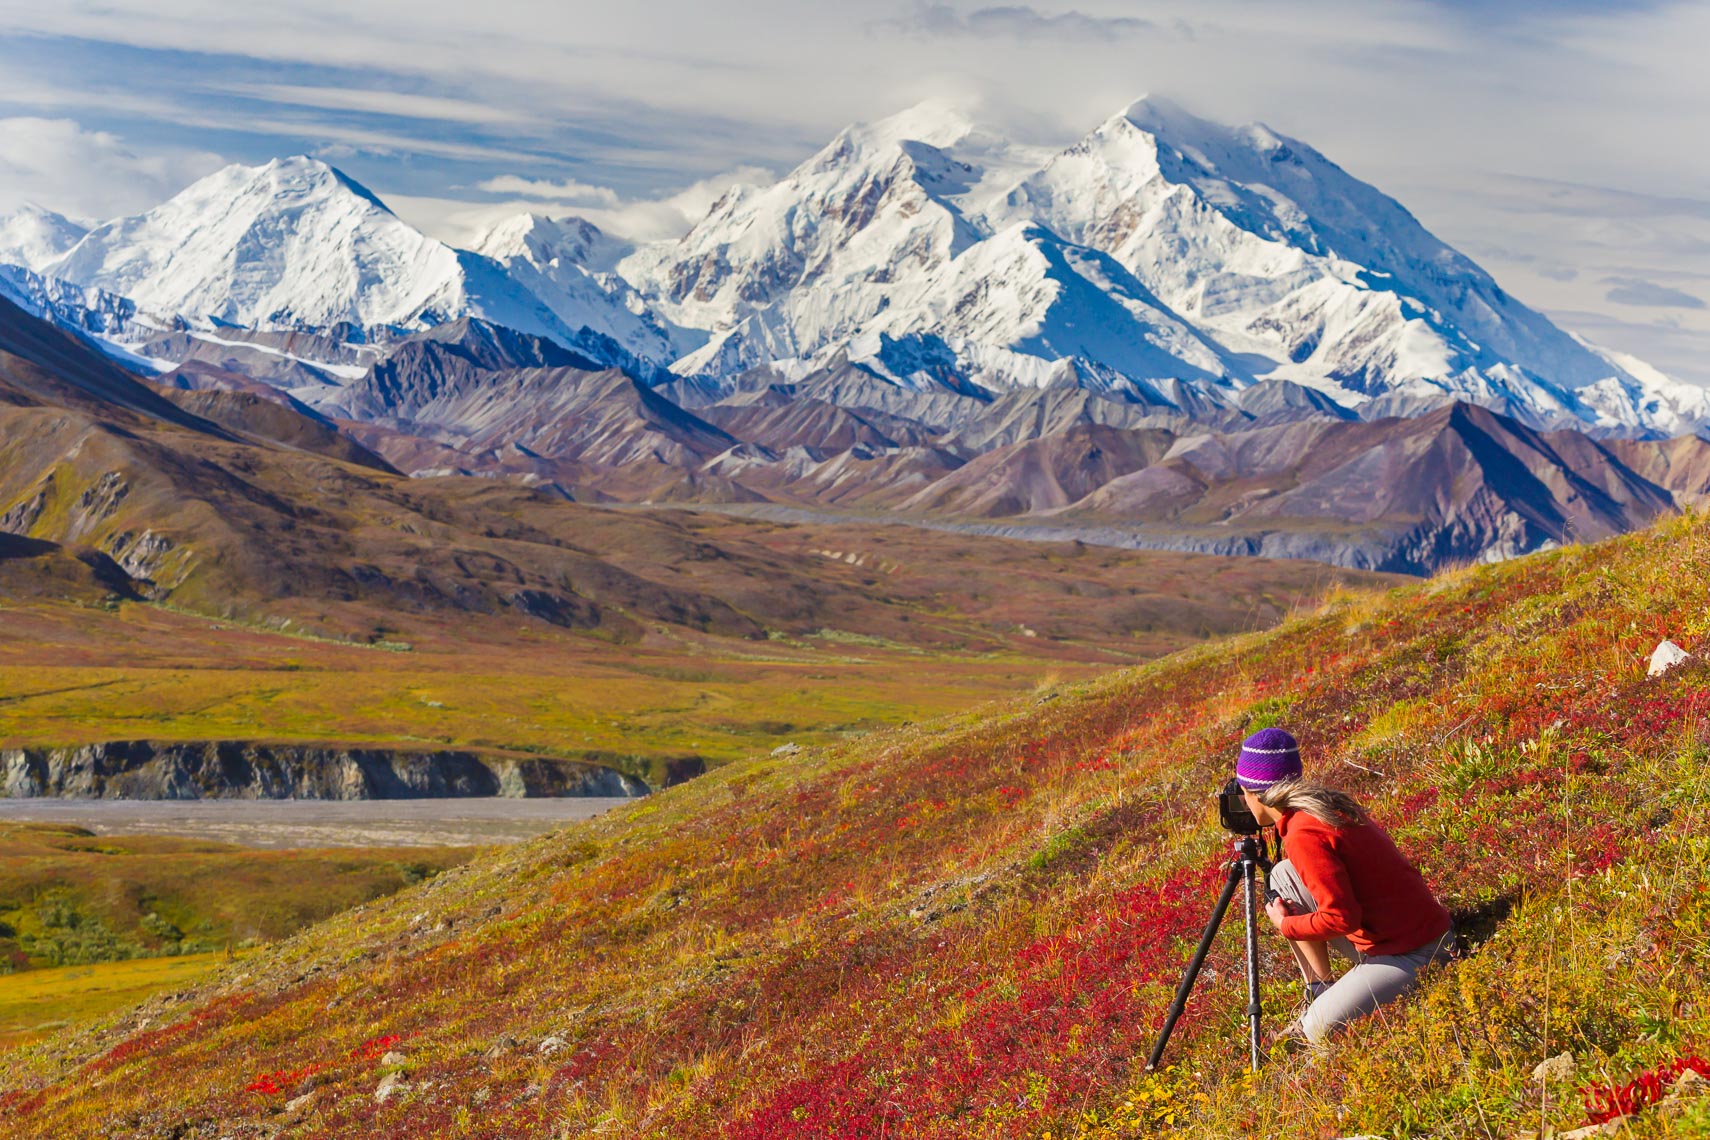 Photographing in Denali National Park | Michael DeYoung